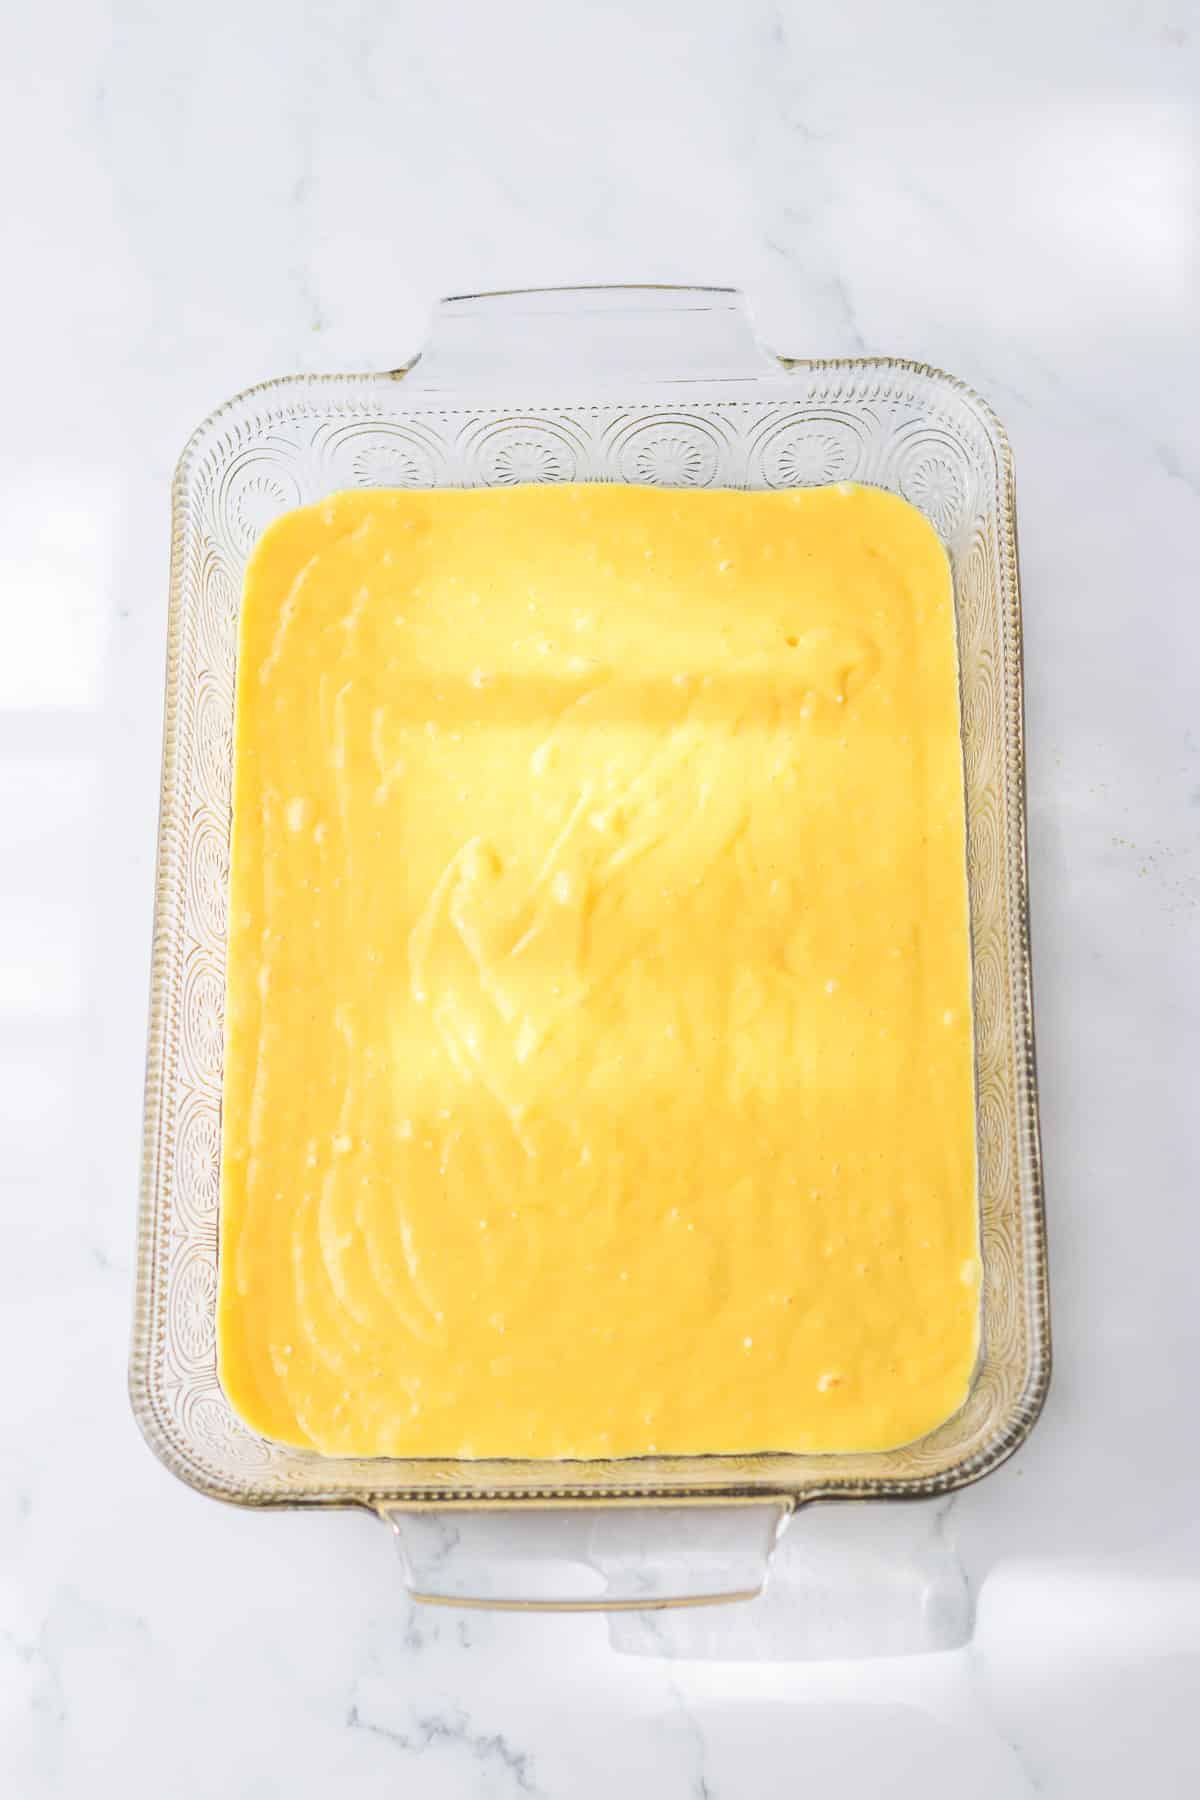 Cake batter in a large rectangle pan from overhead.